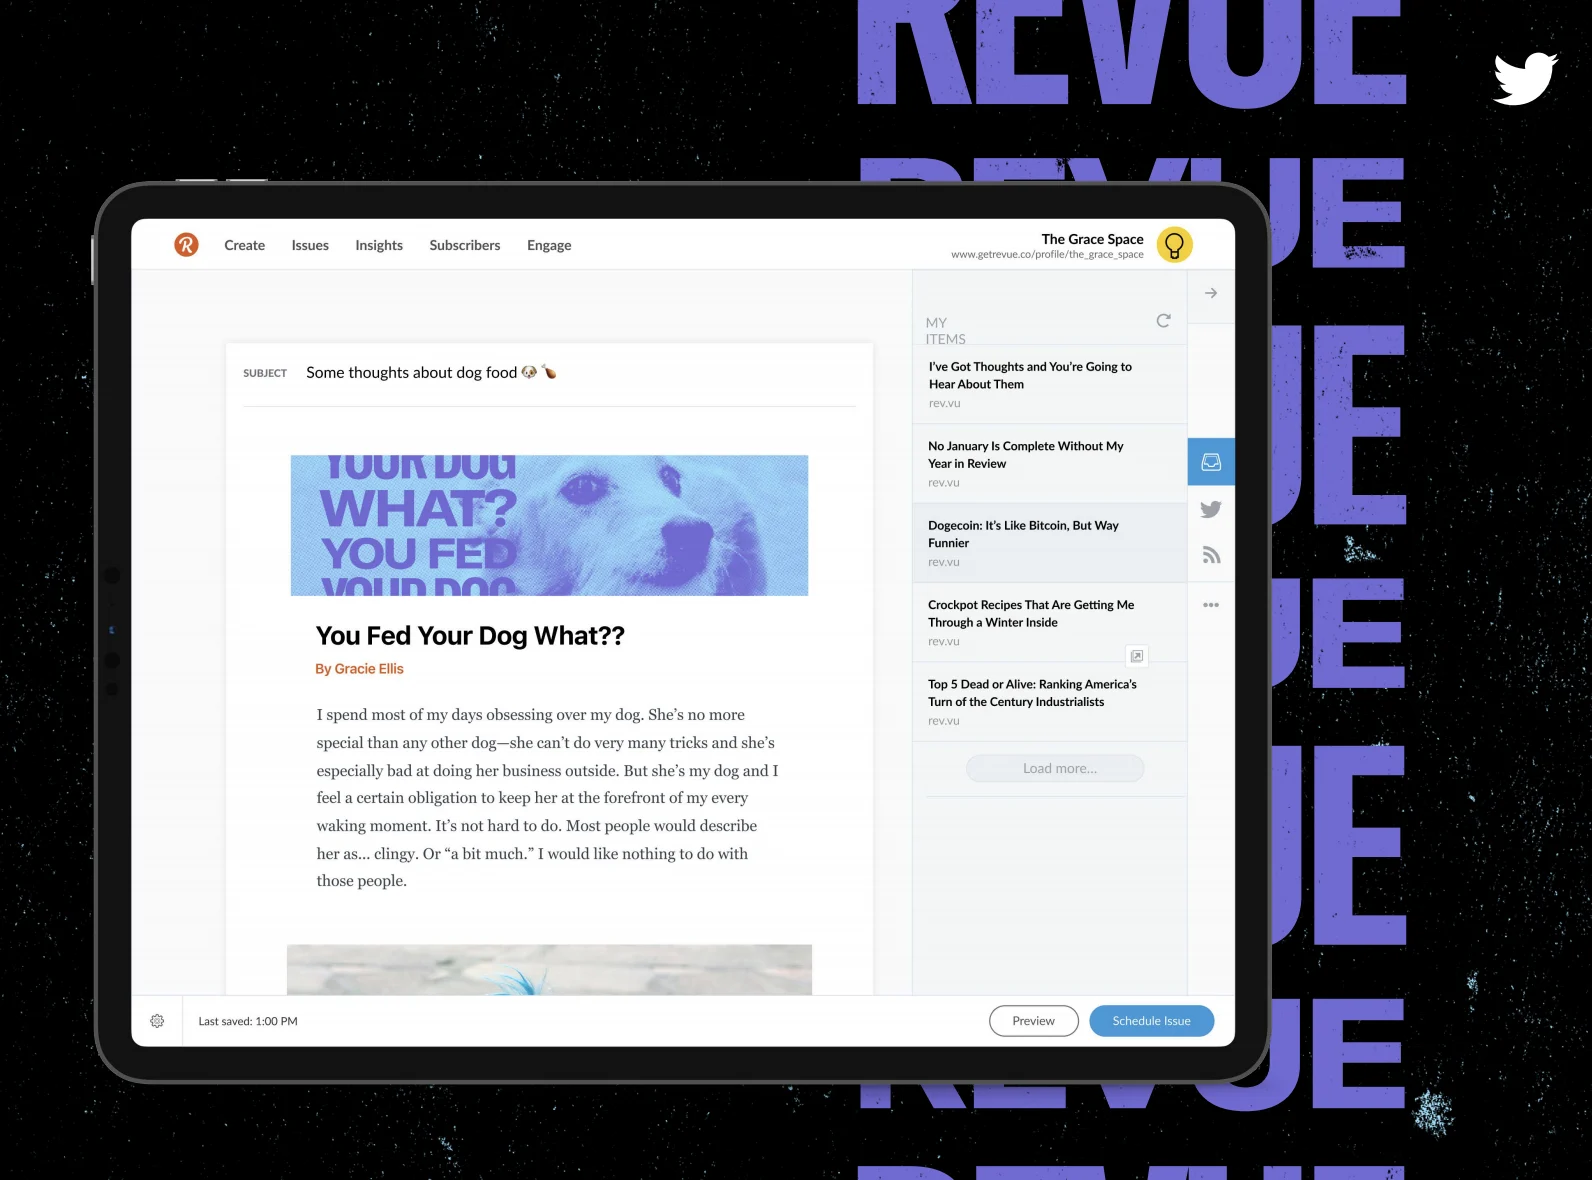 Twitter is integrating newsletters into its service with Revue.